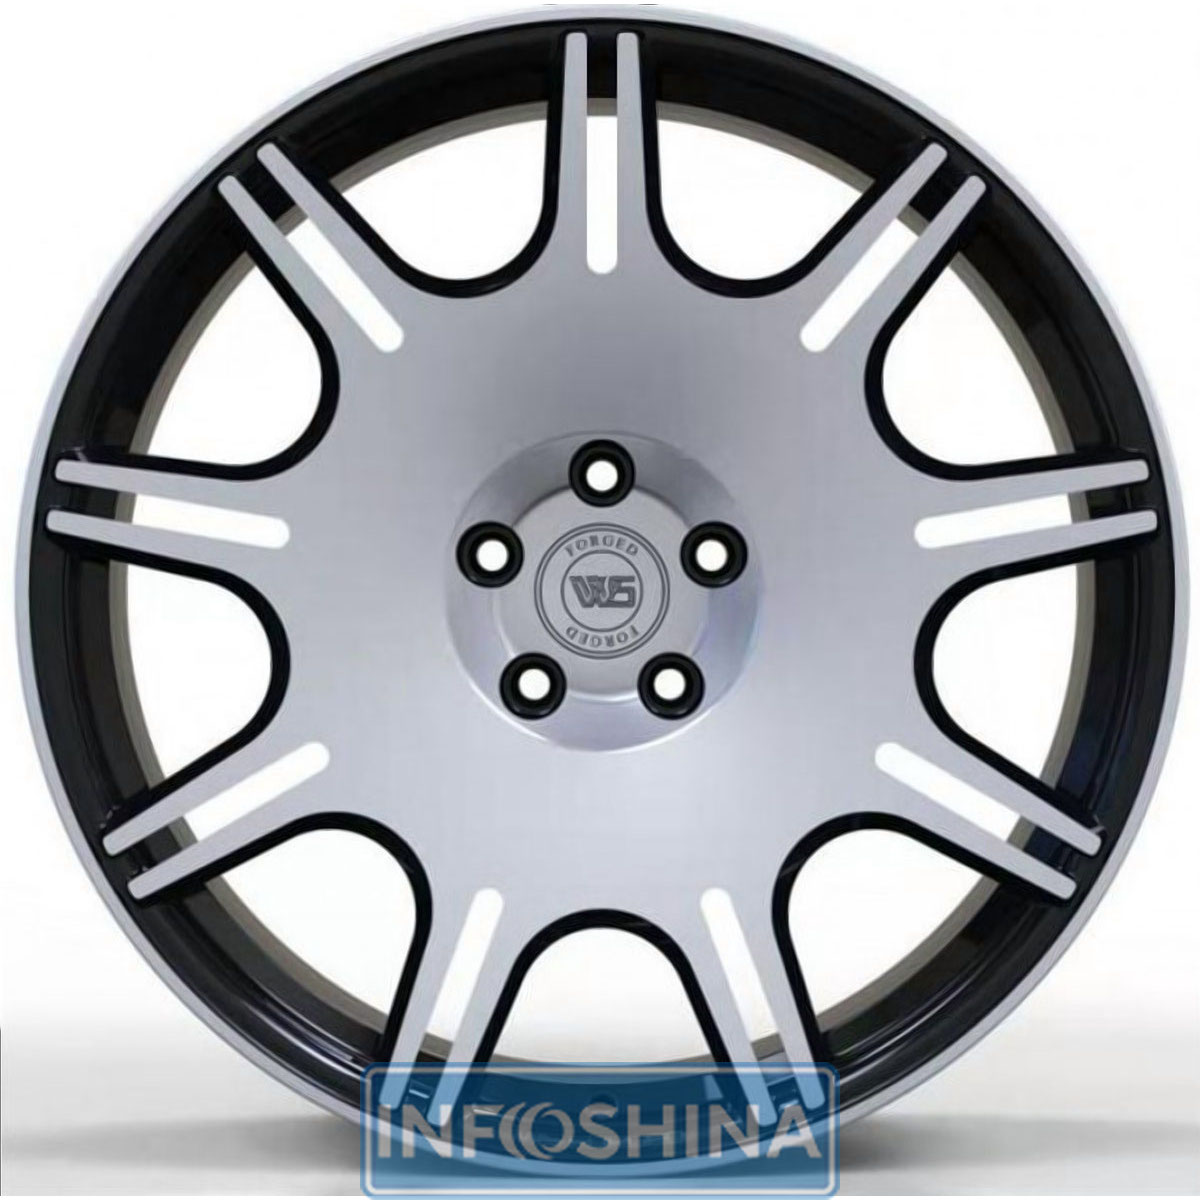 Купити диски WS Forged WS1249 Gloss Black With Machined Face R20 W9 PCD5x112 ET30 DIA66.6